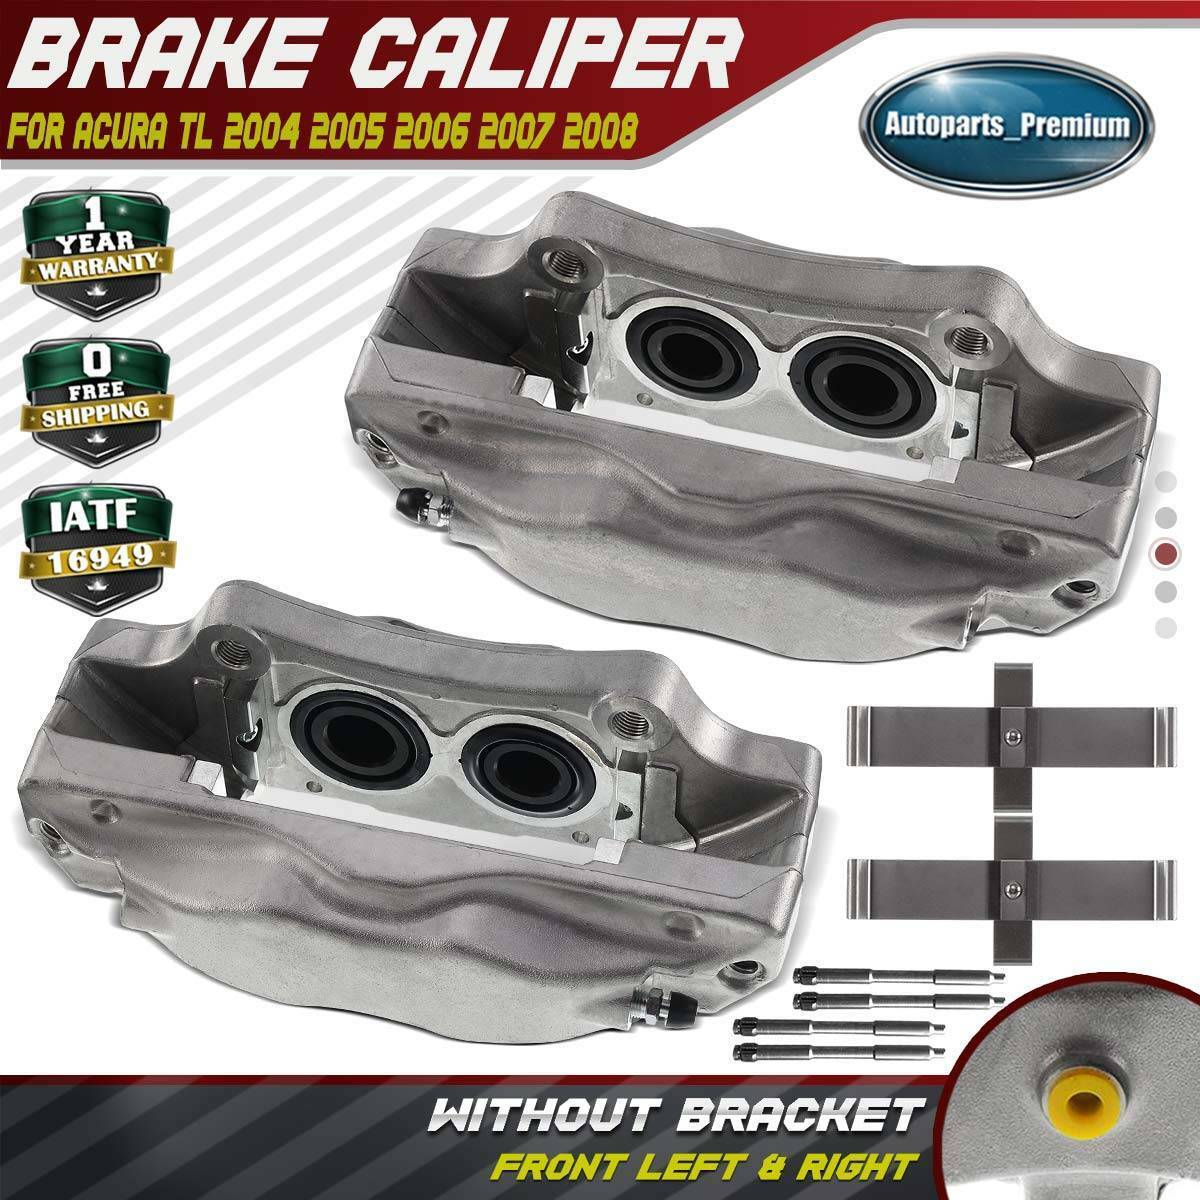 2x Brake Caliper for Acura TL Base 2004-2008 Type-S 2007-2008 Front Left & Right